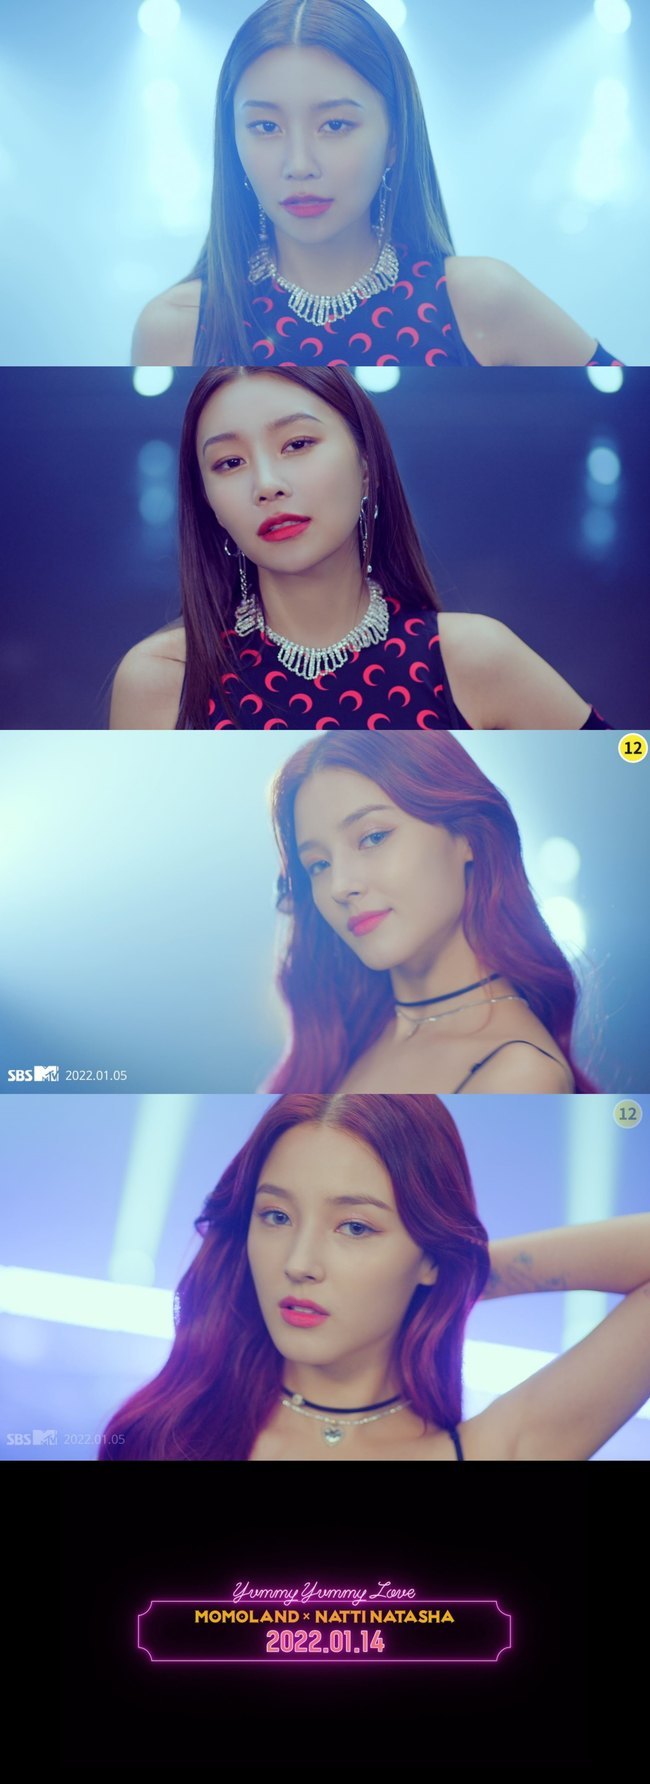 Group Momoland (MOMOLAND) shows off its funky charmMomoland released the last film teaser for the digital single Yummy Yummy Love (Yami Yamirup), which will be released on January 14 via the official SNS channel at 12 p.m. on January 11.The last runners on visual film are Lee Hye-bin and Nancy, who walked out of a dark background and emanated a cynical charm.Nancy has a fascinating look under the colorful lighting and has perfected the funky sexy concept.In the background of the video, a passage of the lyrics Yummy Yummy Love, which is the same as the title of Momolands new song, flowed out and caused curiosity about the new song.Momoland is releasing a variety of teaser contents sequentially ahead of the release of the new song Yummy Yummy Love.The album, released by Momoland in about a year, was joined by world-renowned artist Natti Natasha Richardson (Natti Natasha).After his debut, Momoland made it to the box office, releasing Bam (BAAM), Bananachacha and Thumbs Up in succession following Full-Full.Momoland will release its first music video teaser on Wednesday and continue its comeback countdown.